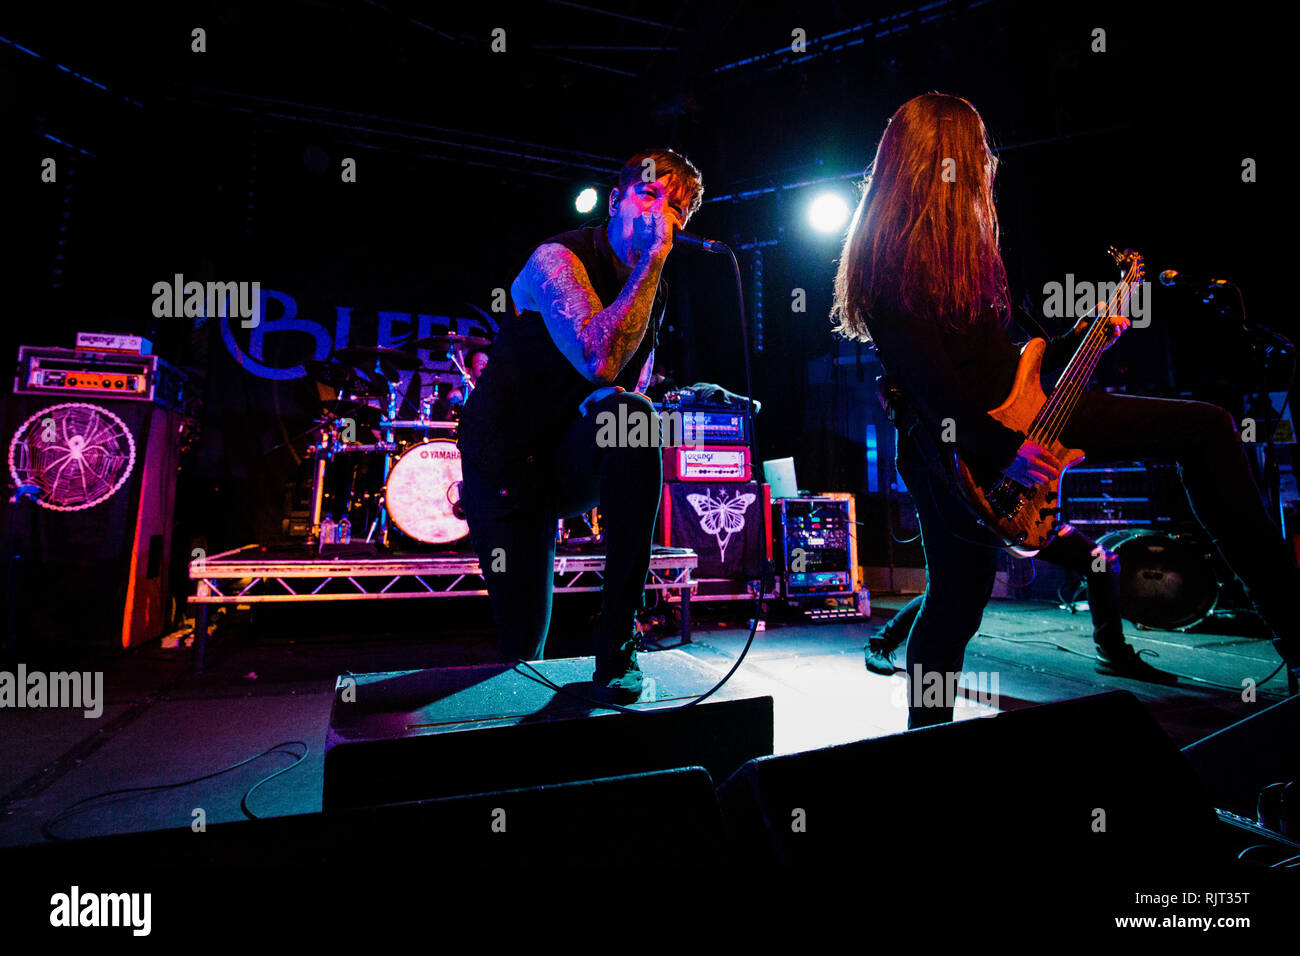 Cambridge, UK. 7th February 2019. Scottish metal band Bleed from Within support Cancer Bats at the Cambridge Junction. Richard Etteridge / Alamy Live News Stock Photo